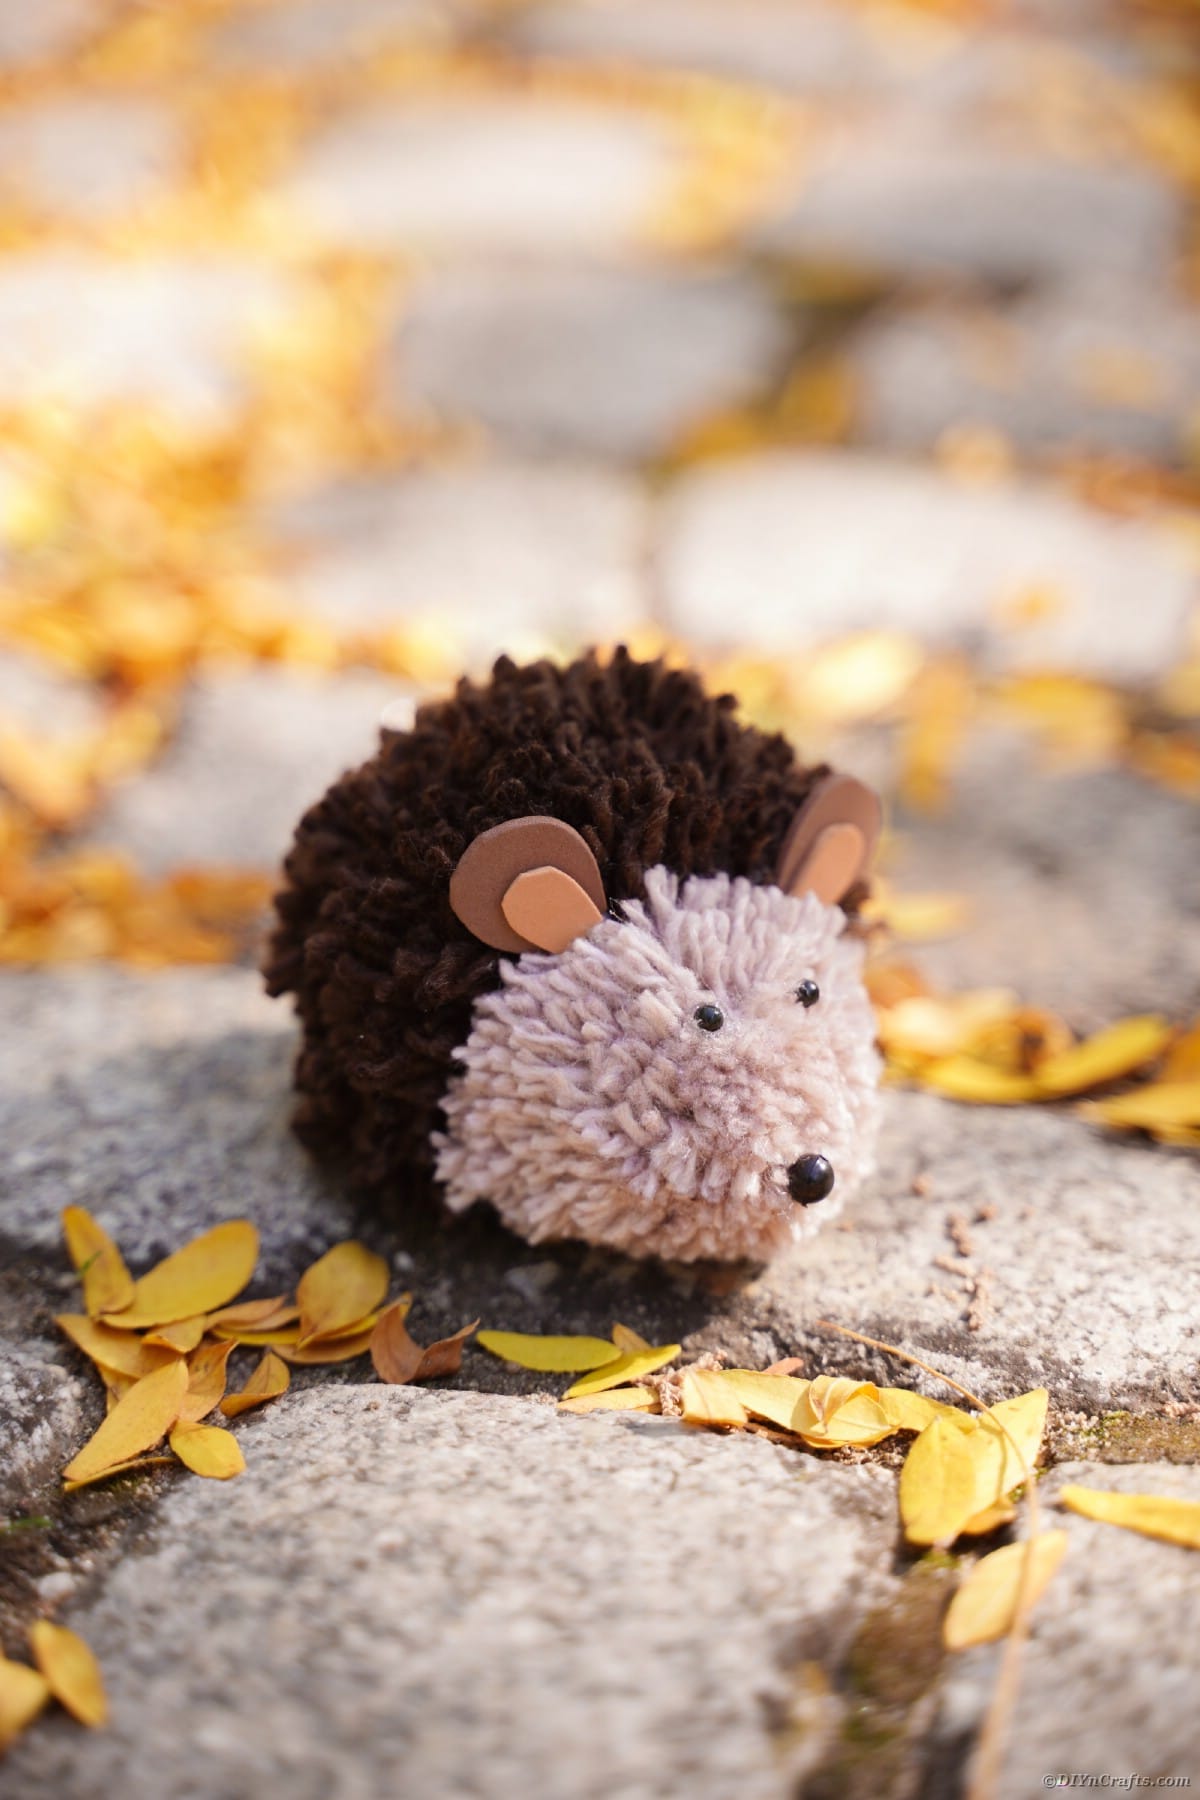 Cobblestone path with yarn hedgehog and leaves